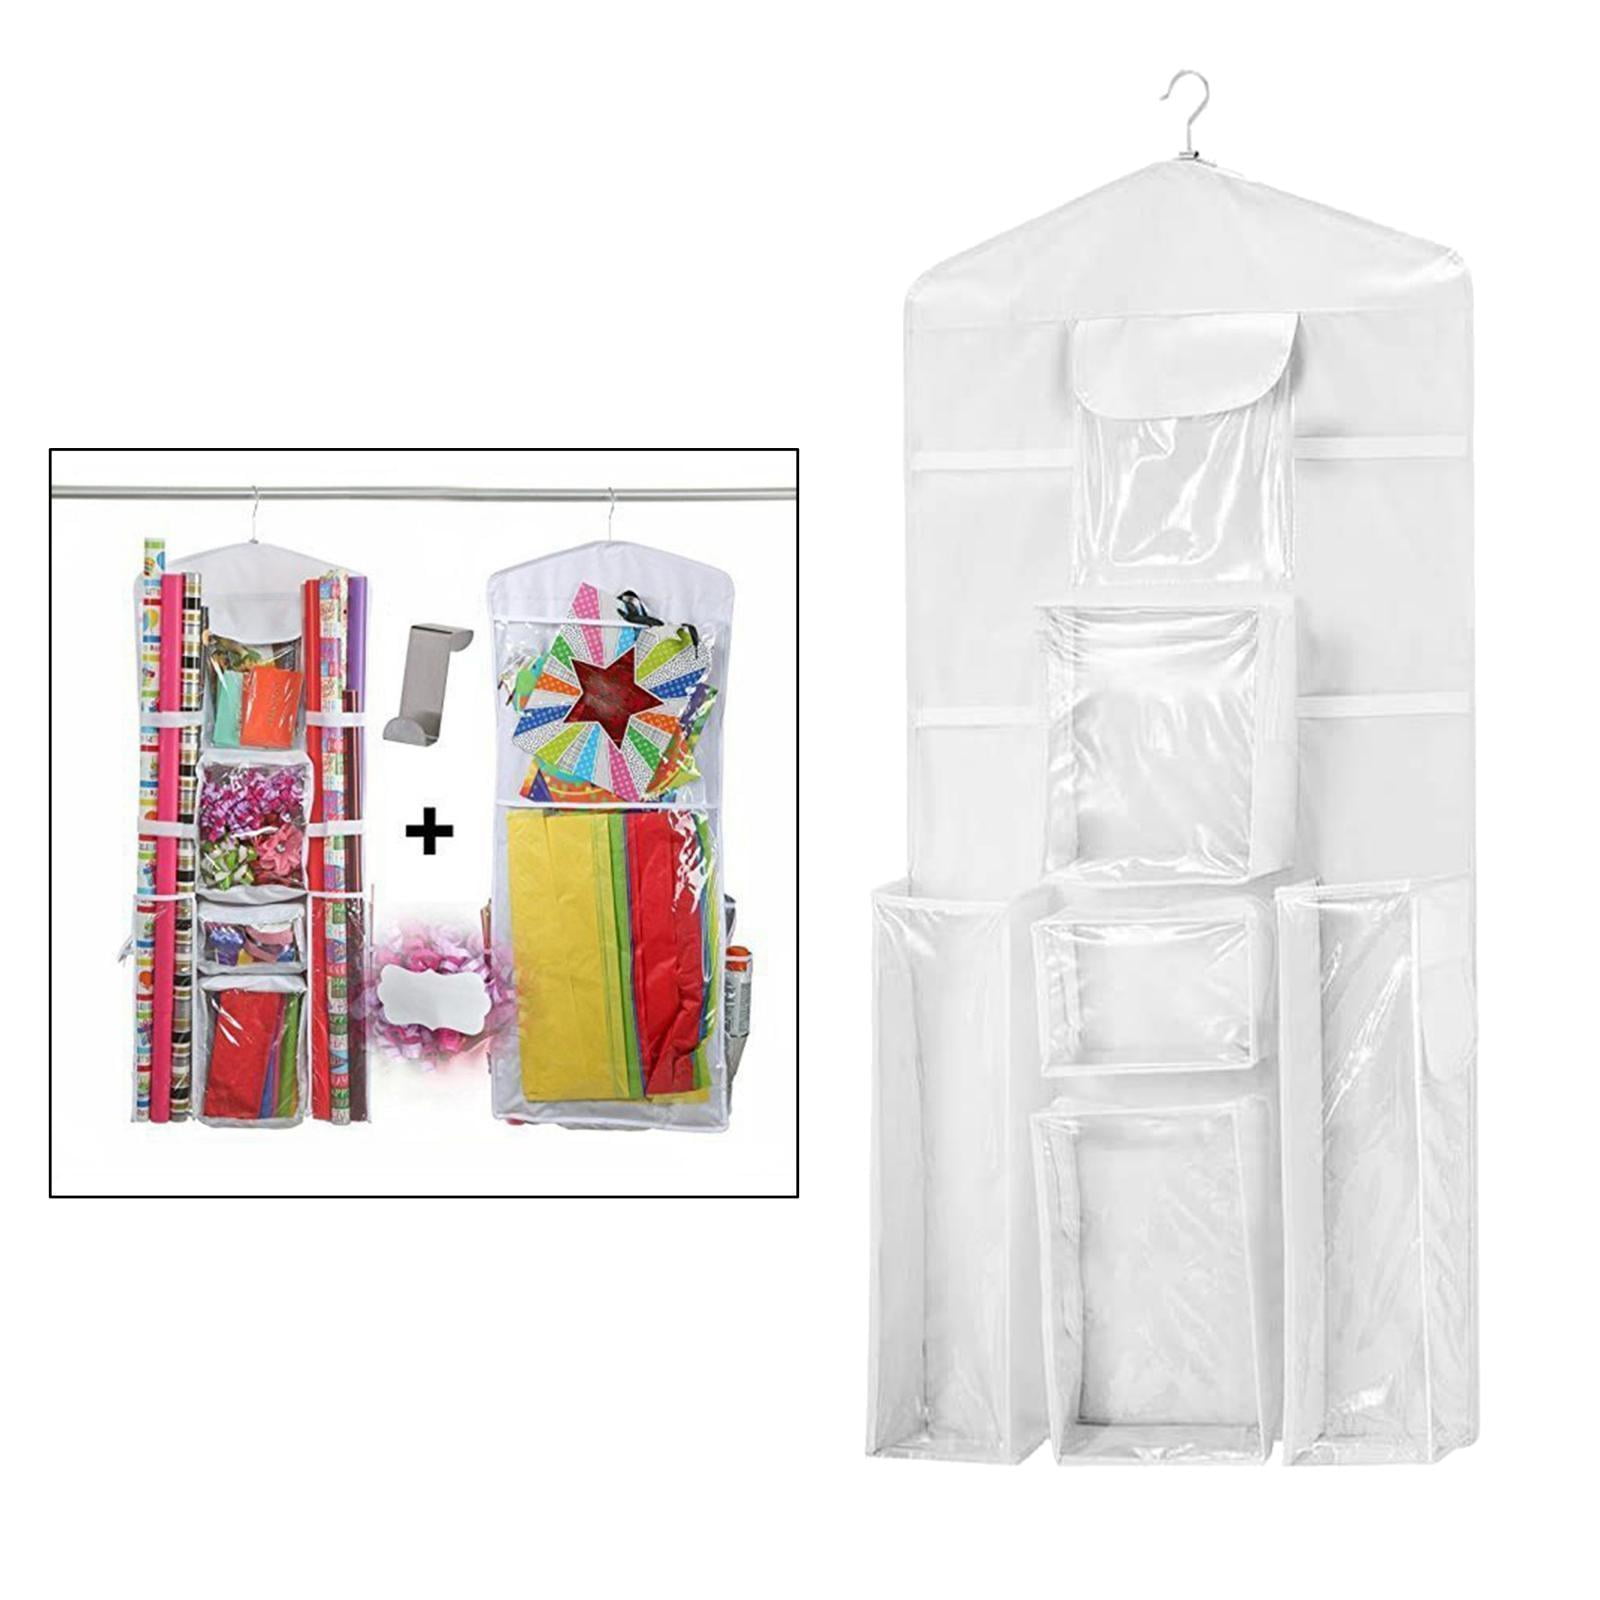 EXLIFBAG Wrapping Paper Storage, Gift Wrap Organizer Holder Double